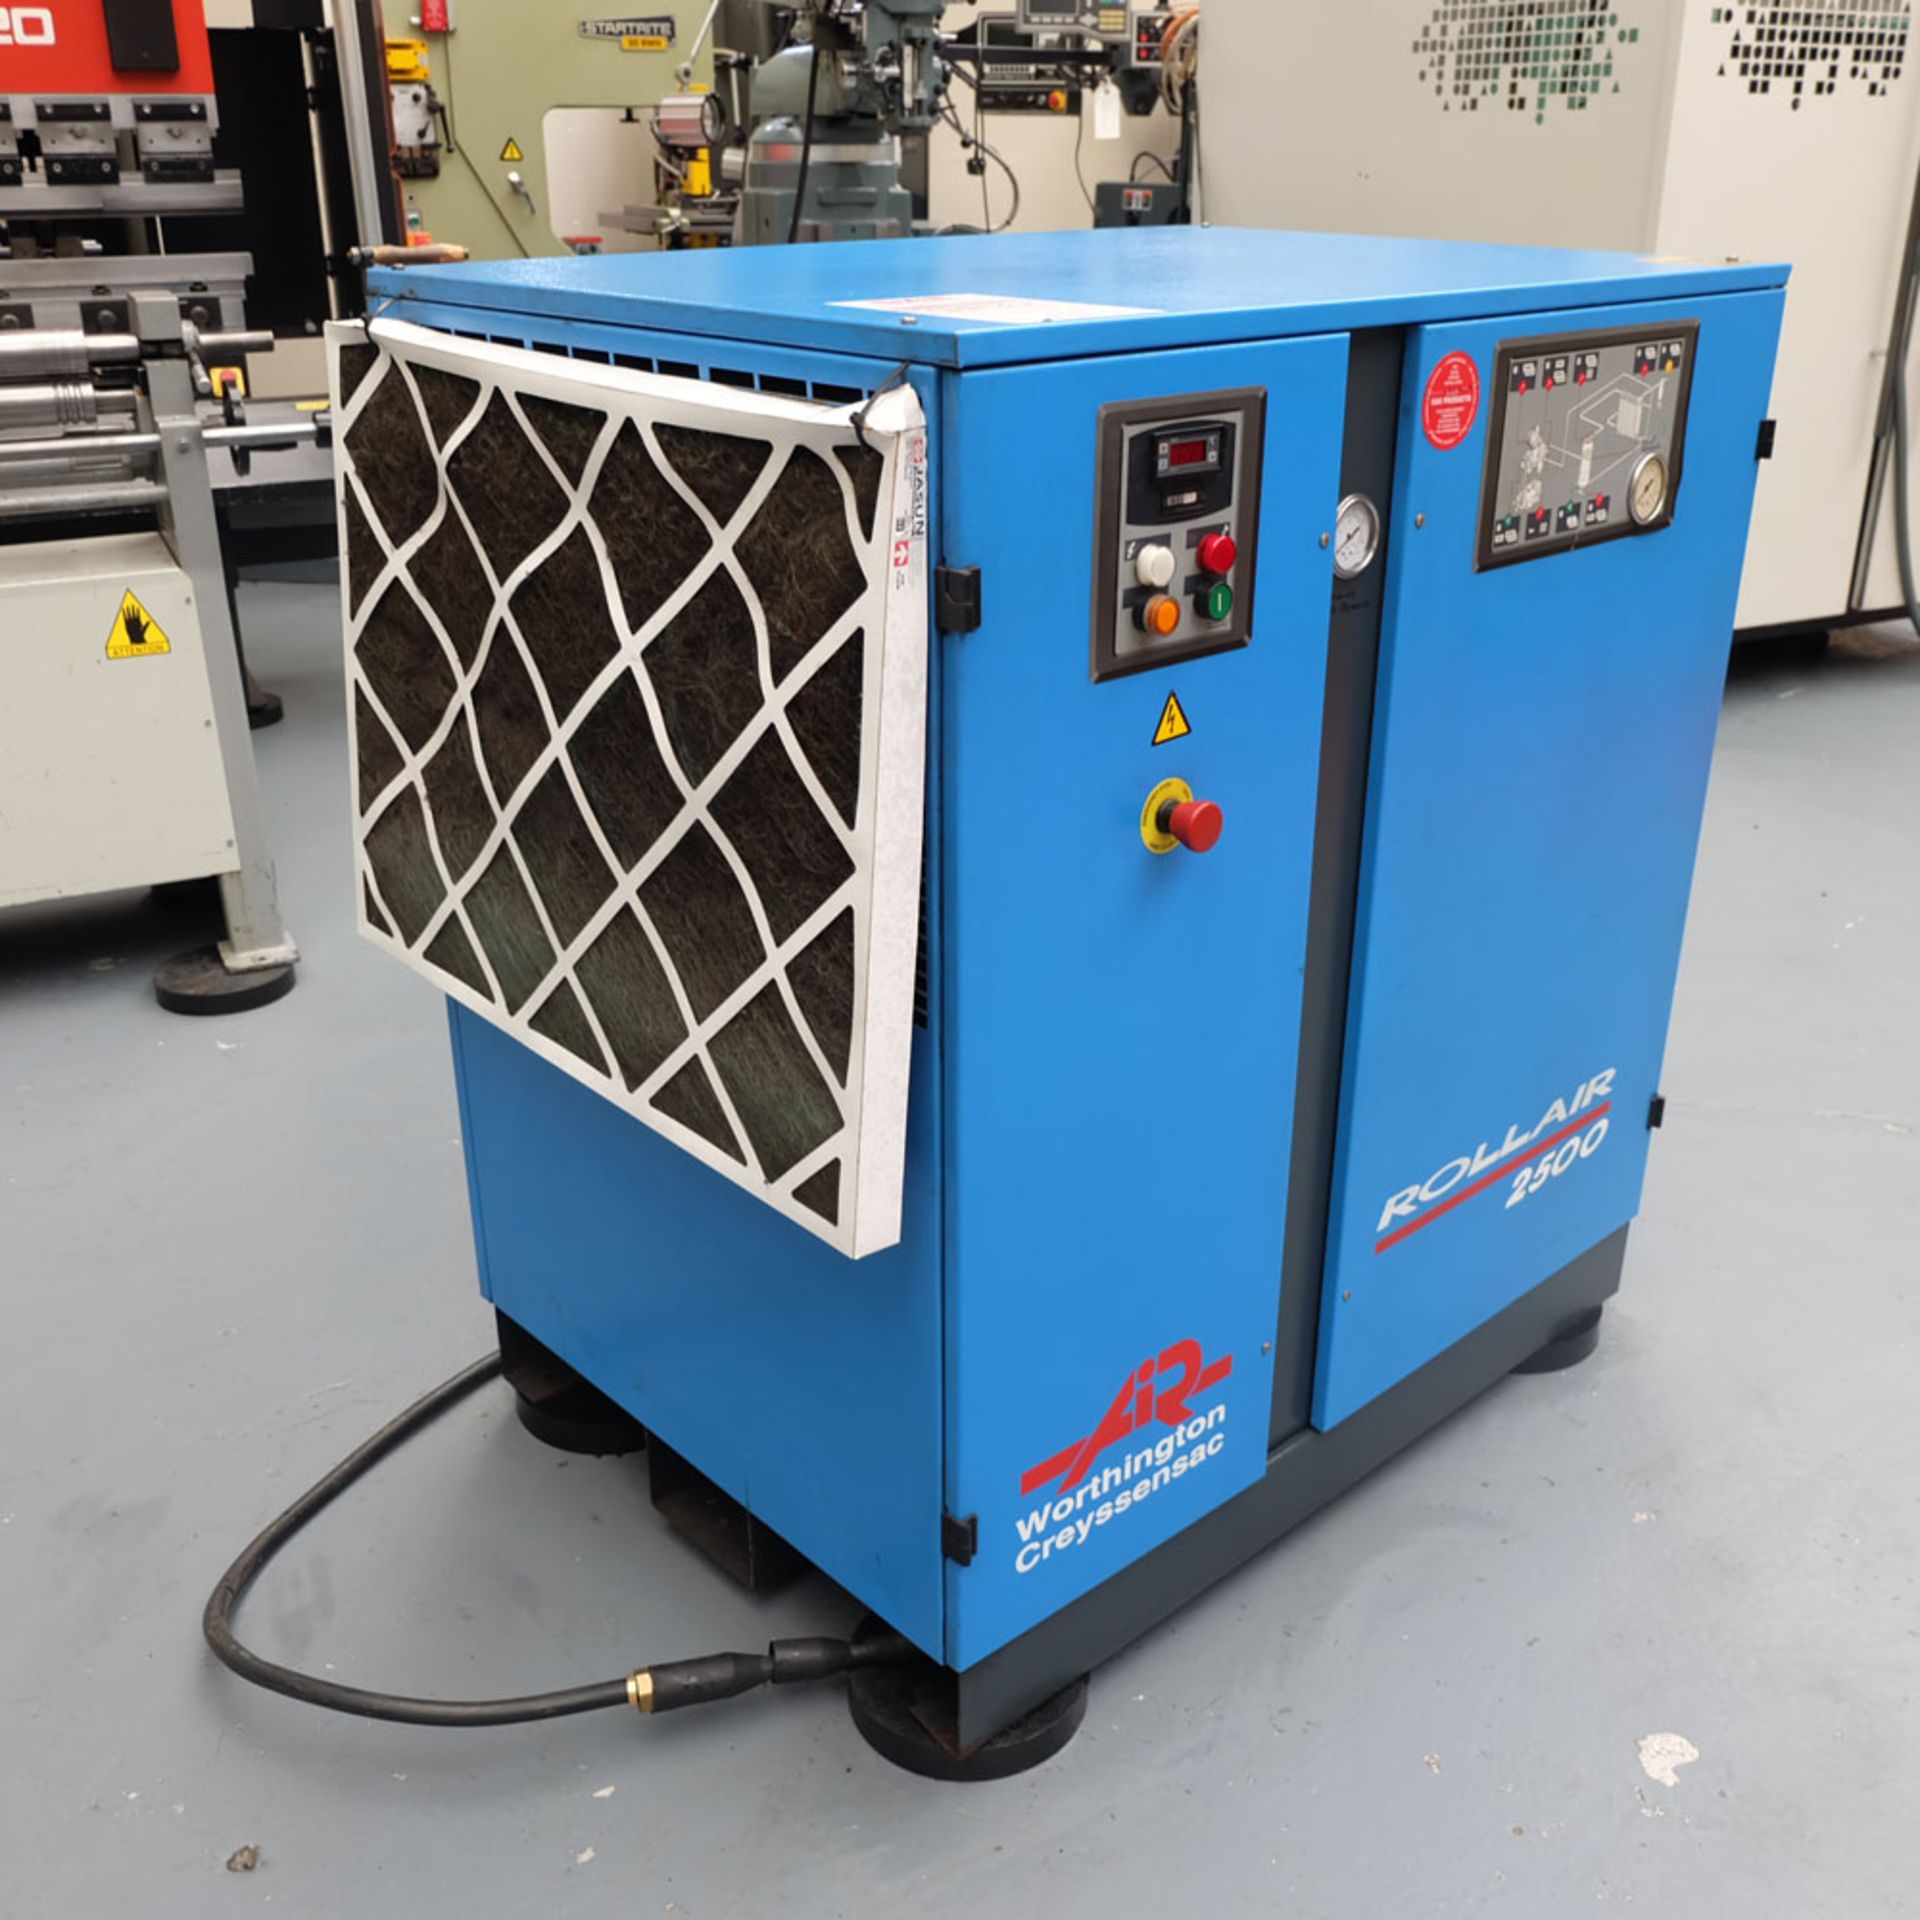 Worthington Roll-Air 2500 Rotary Air Compressor. 8 Bar. 18.5KW. - Image 2 of 8